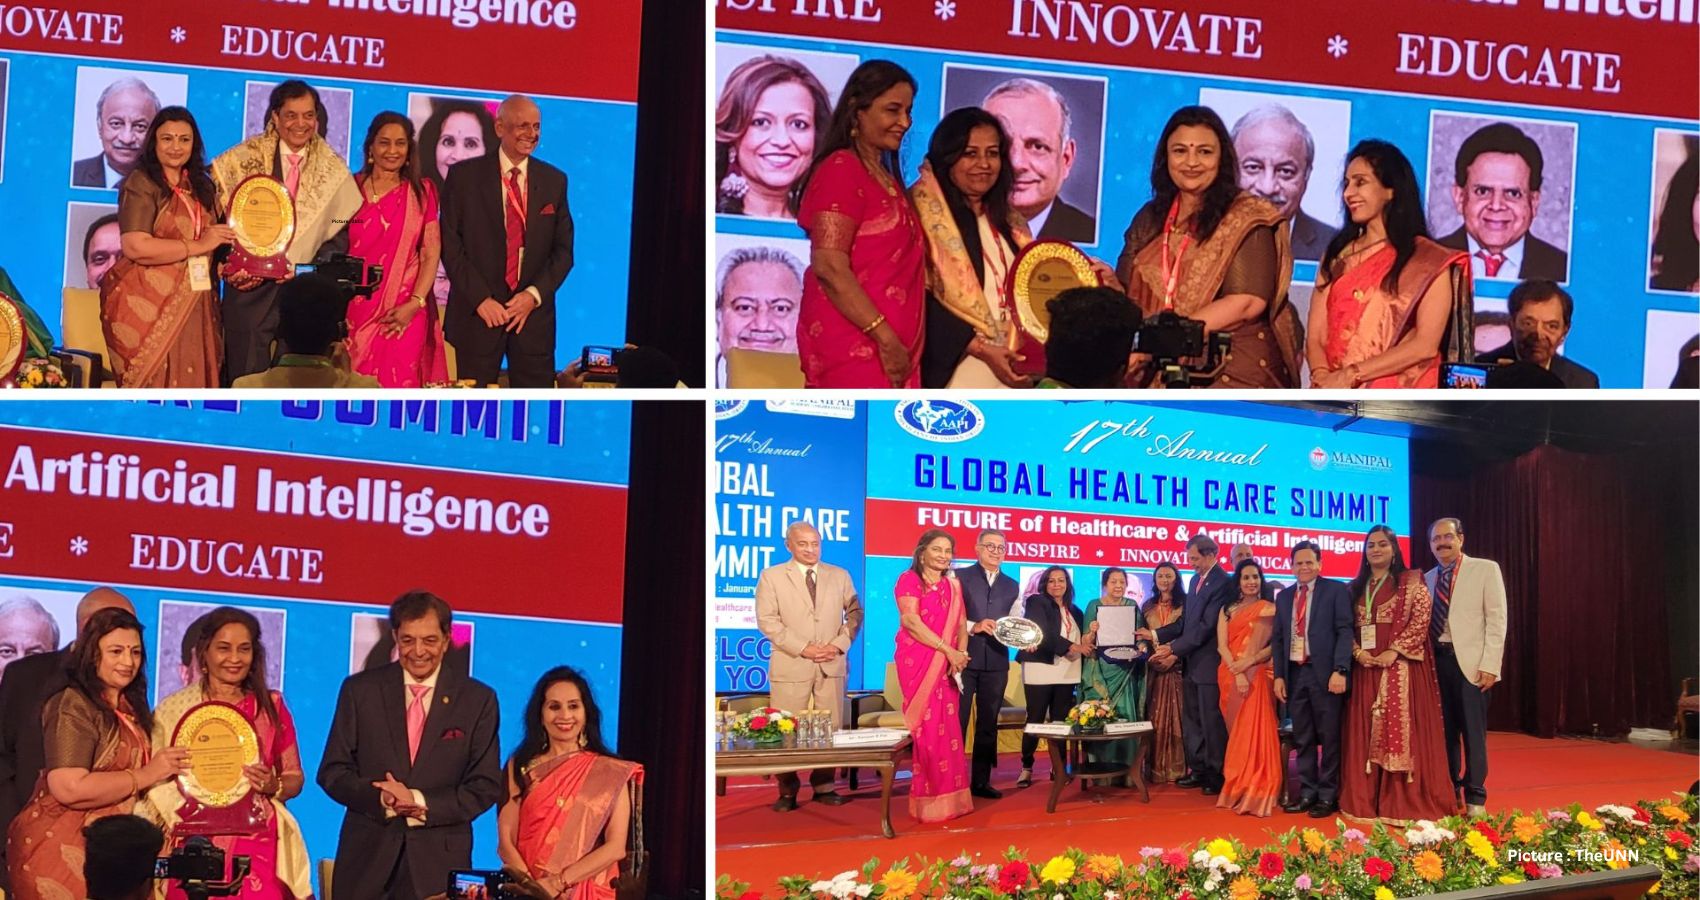 AAPI’s Global Healthcare Summit In Manipal Ends, Giving Delegates A Memorable Experience In Scientific Learning And Authentic Karnataka Culture